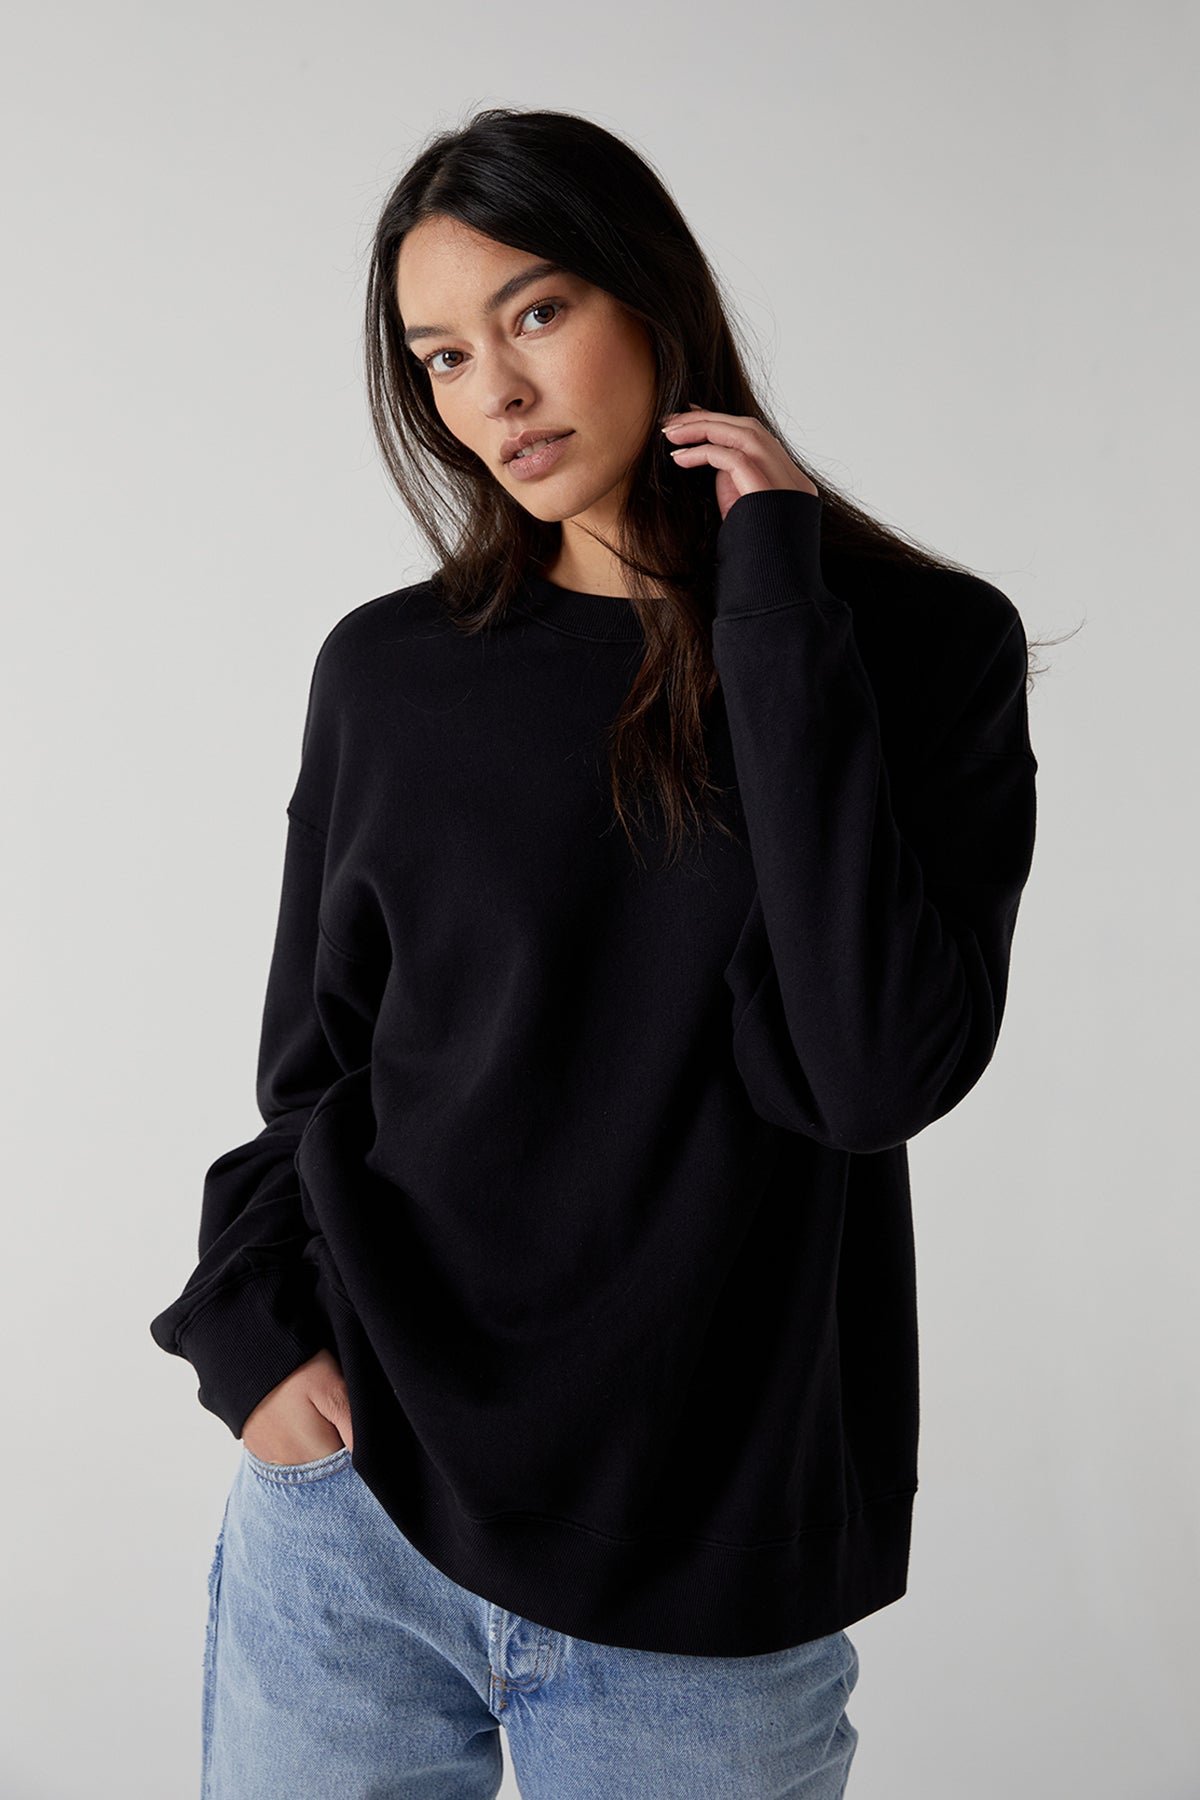   The model is wearing a black ABBOT SWEATSHIRT by Velvet by Jenny Graham and jeans. 